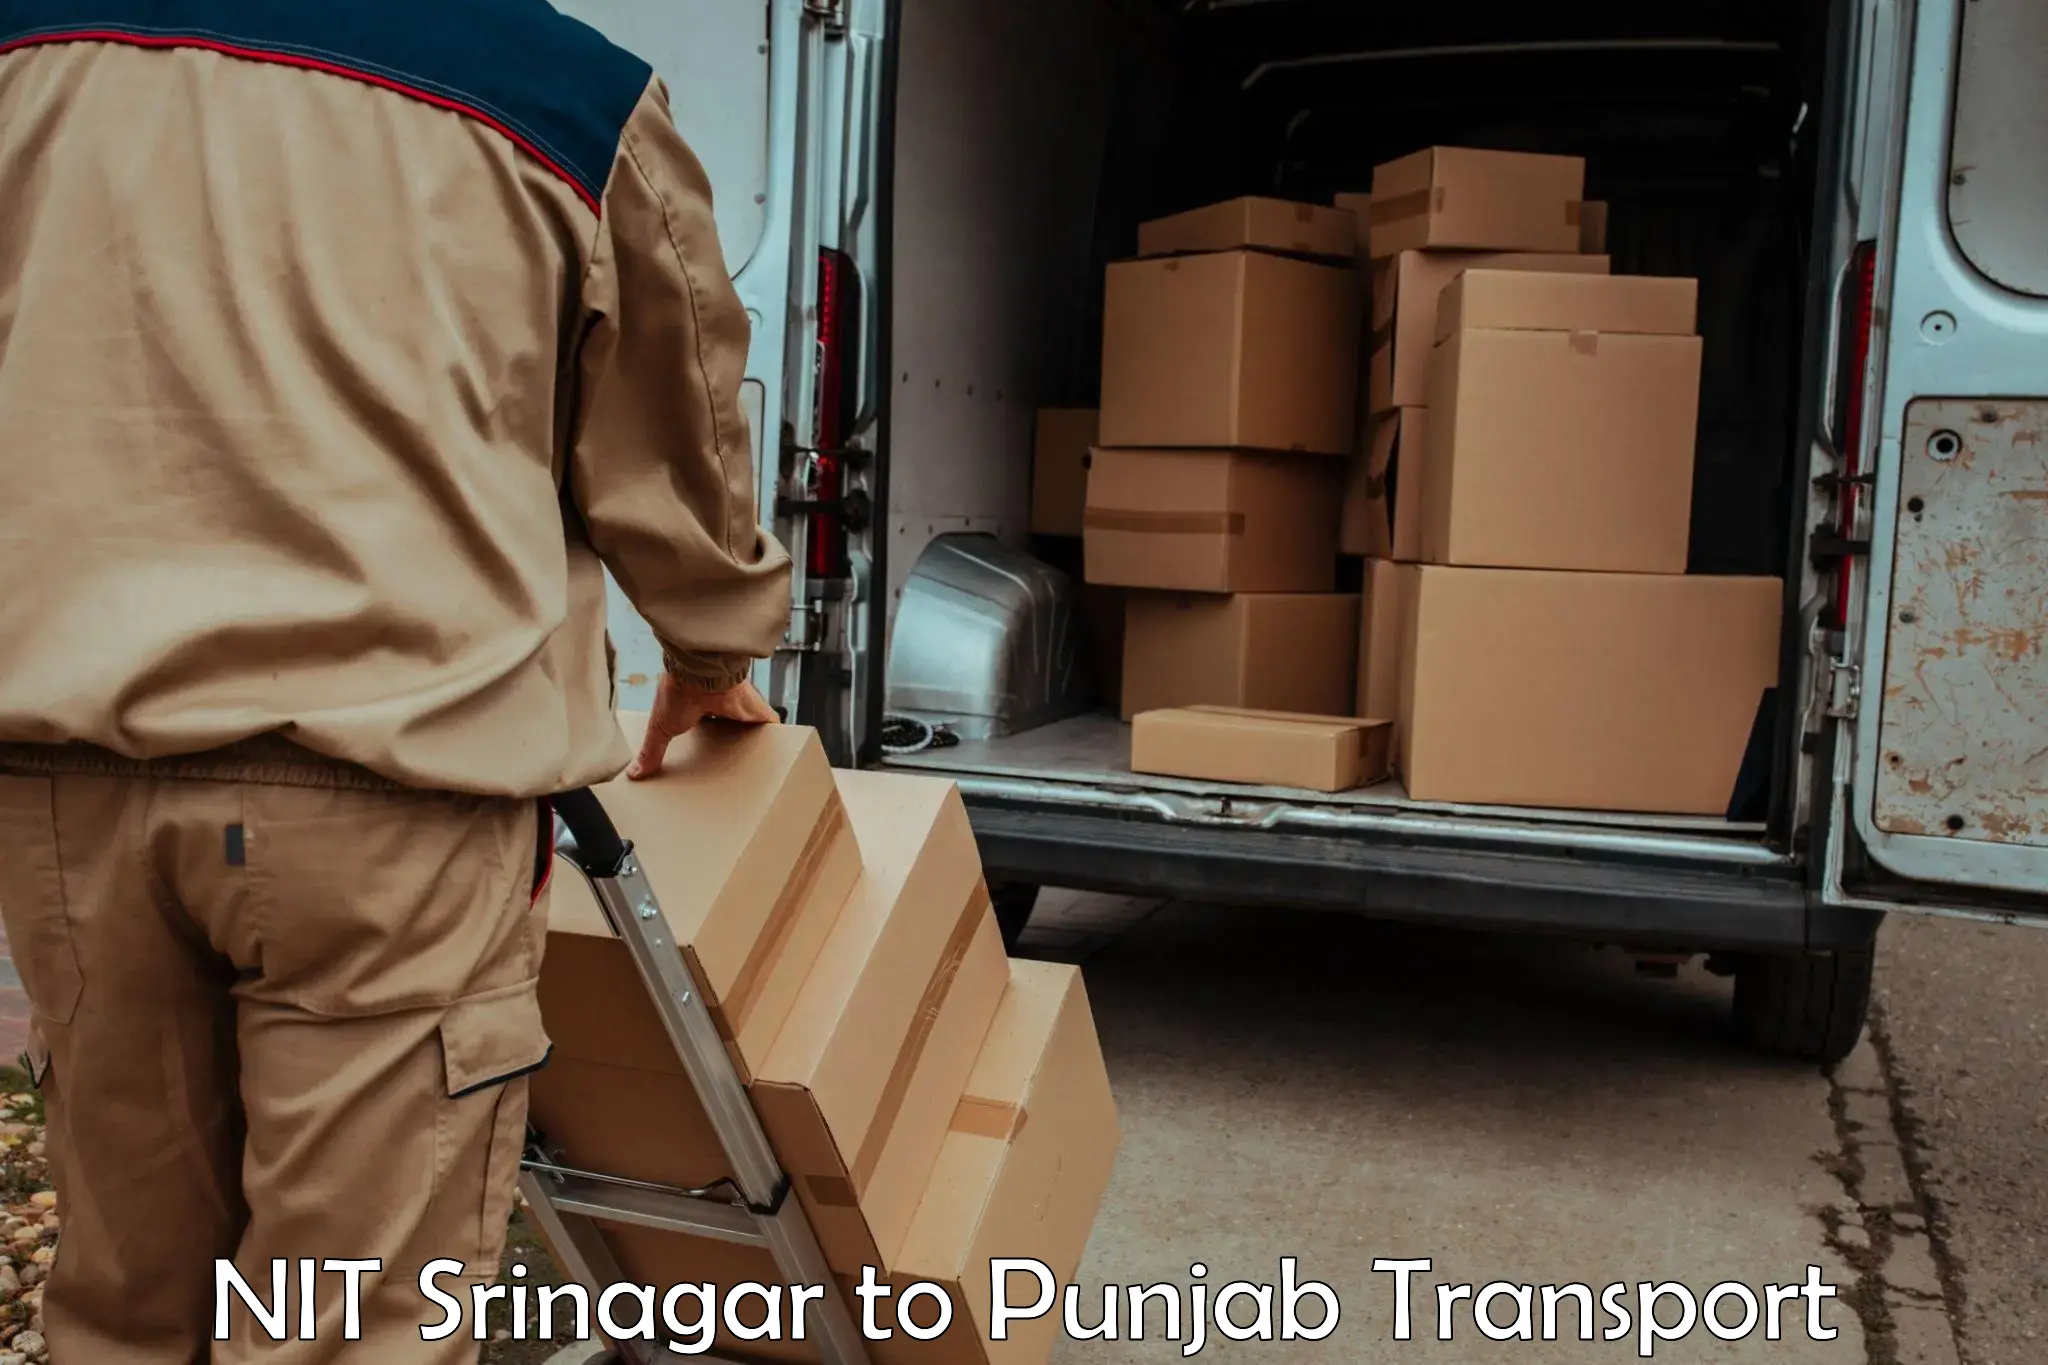 Goods delivery service NIT Srinagar to Patiala